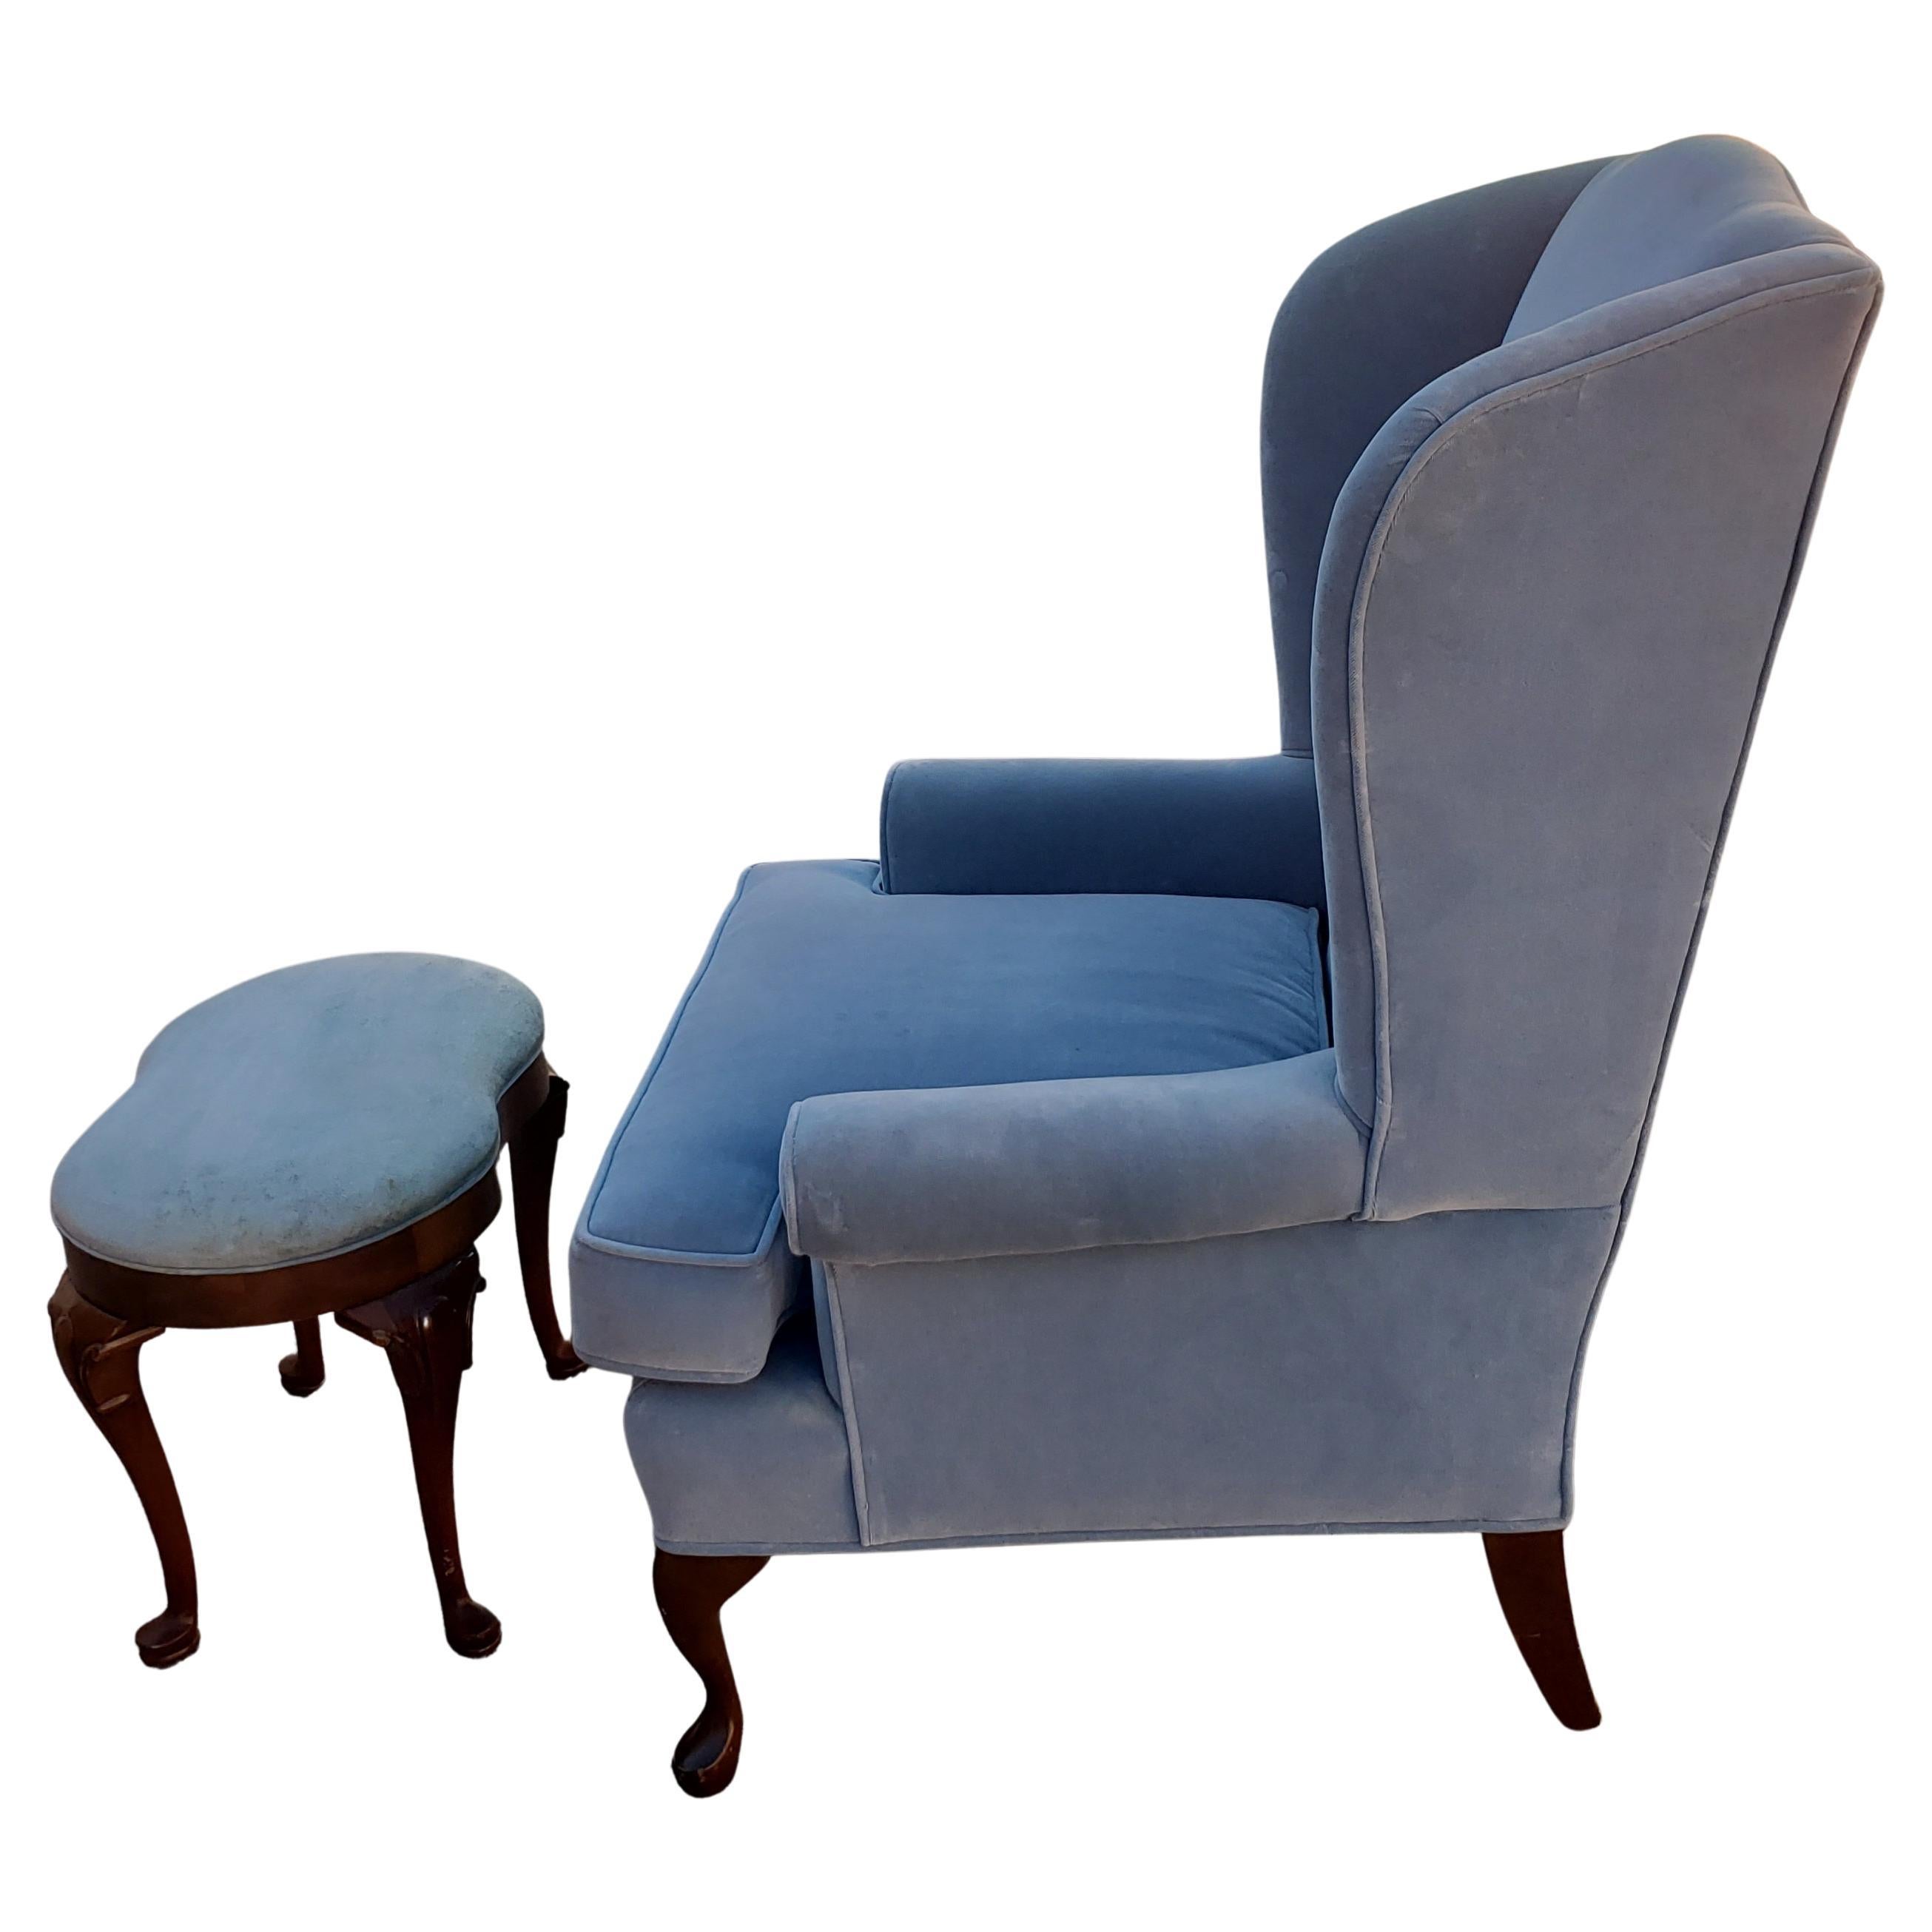 Amazingly well kept wingback chair by Southwood and Co. Original French blue velvet upholstery in very good condition and clean. No stains and extremely minimal wear. Very soft and very comfortable. Chair was used with cover all the time. Ottoman